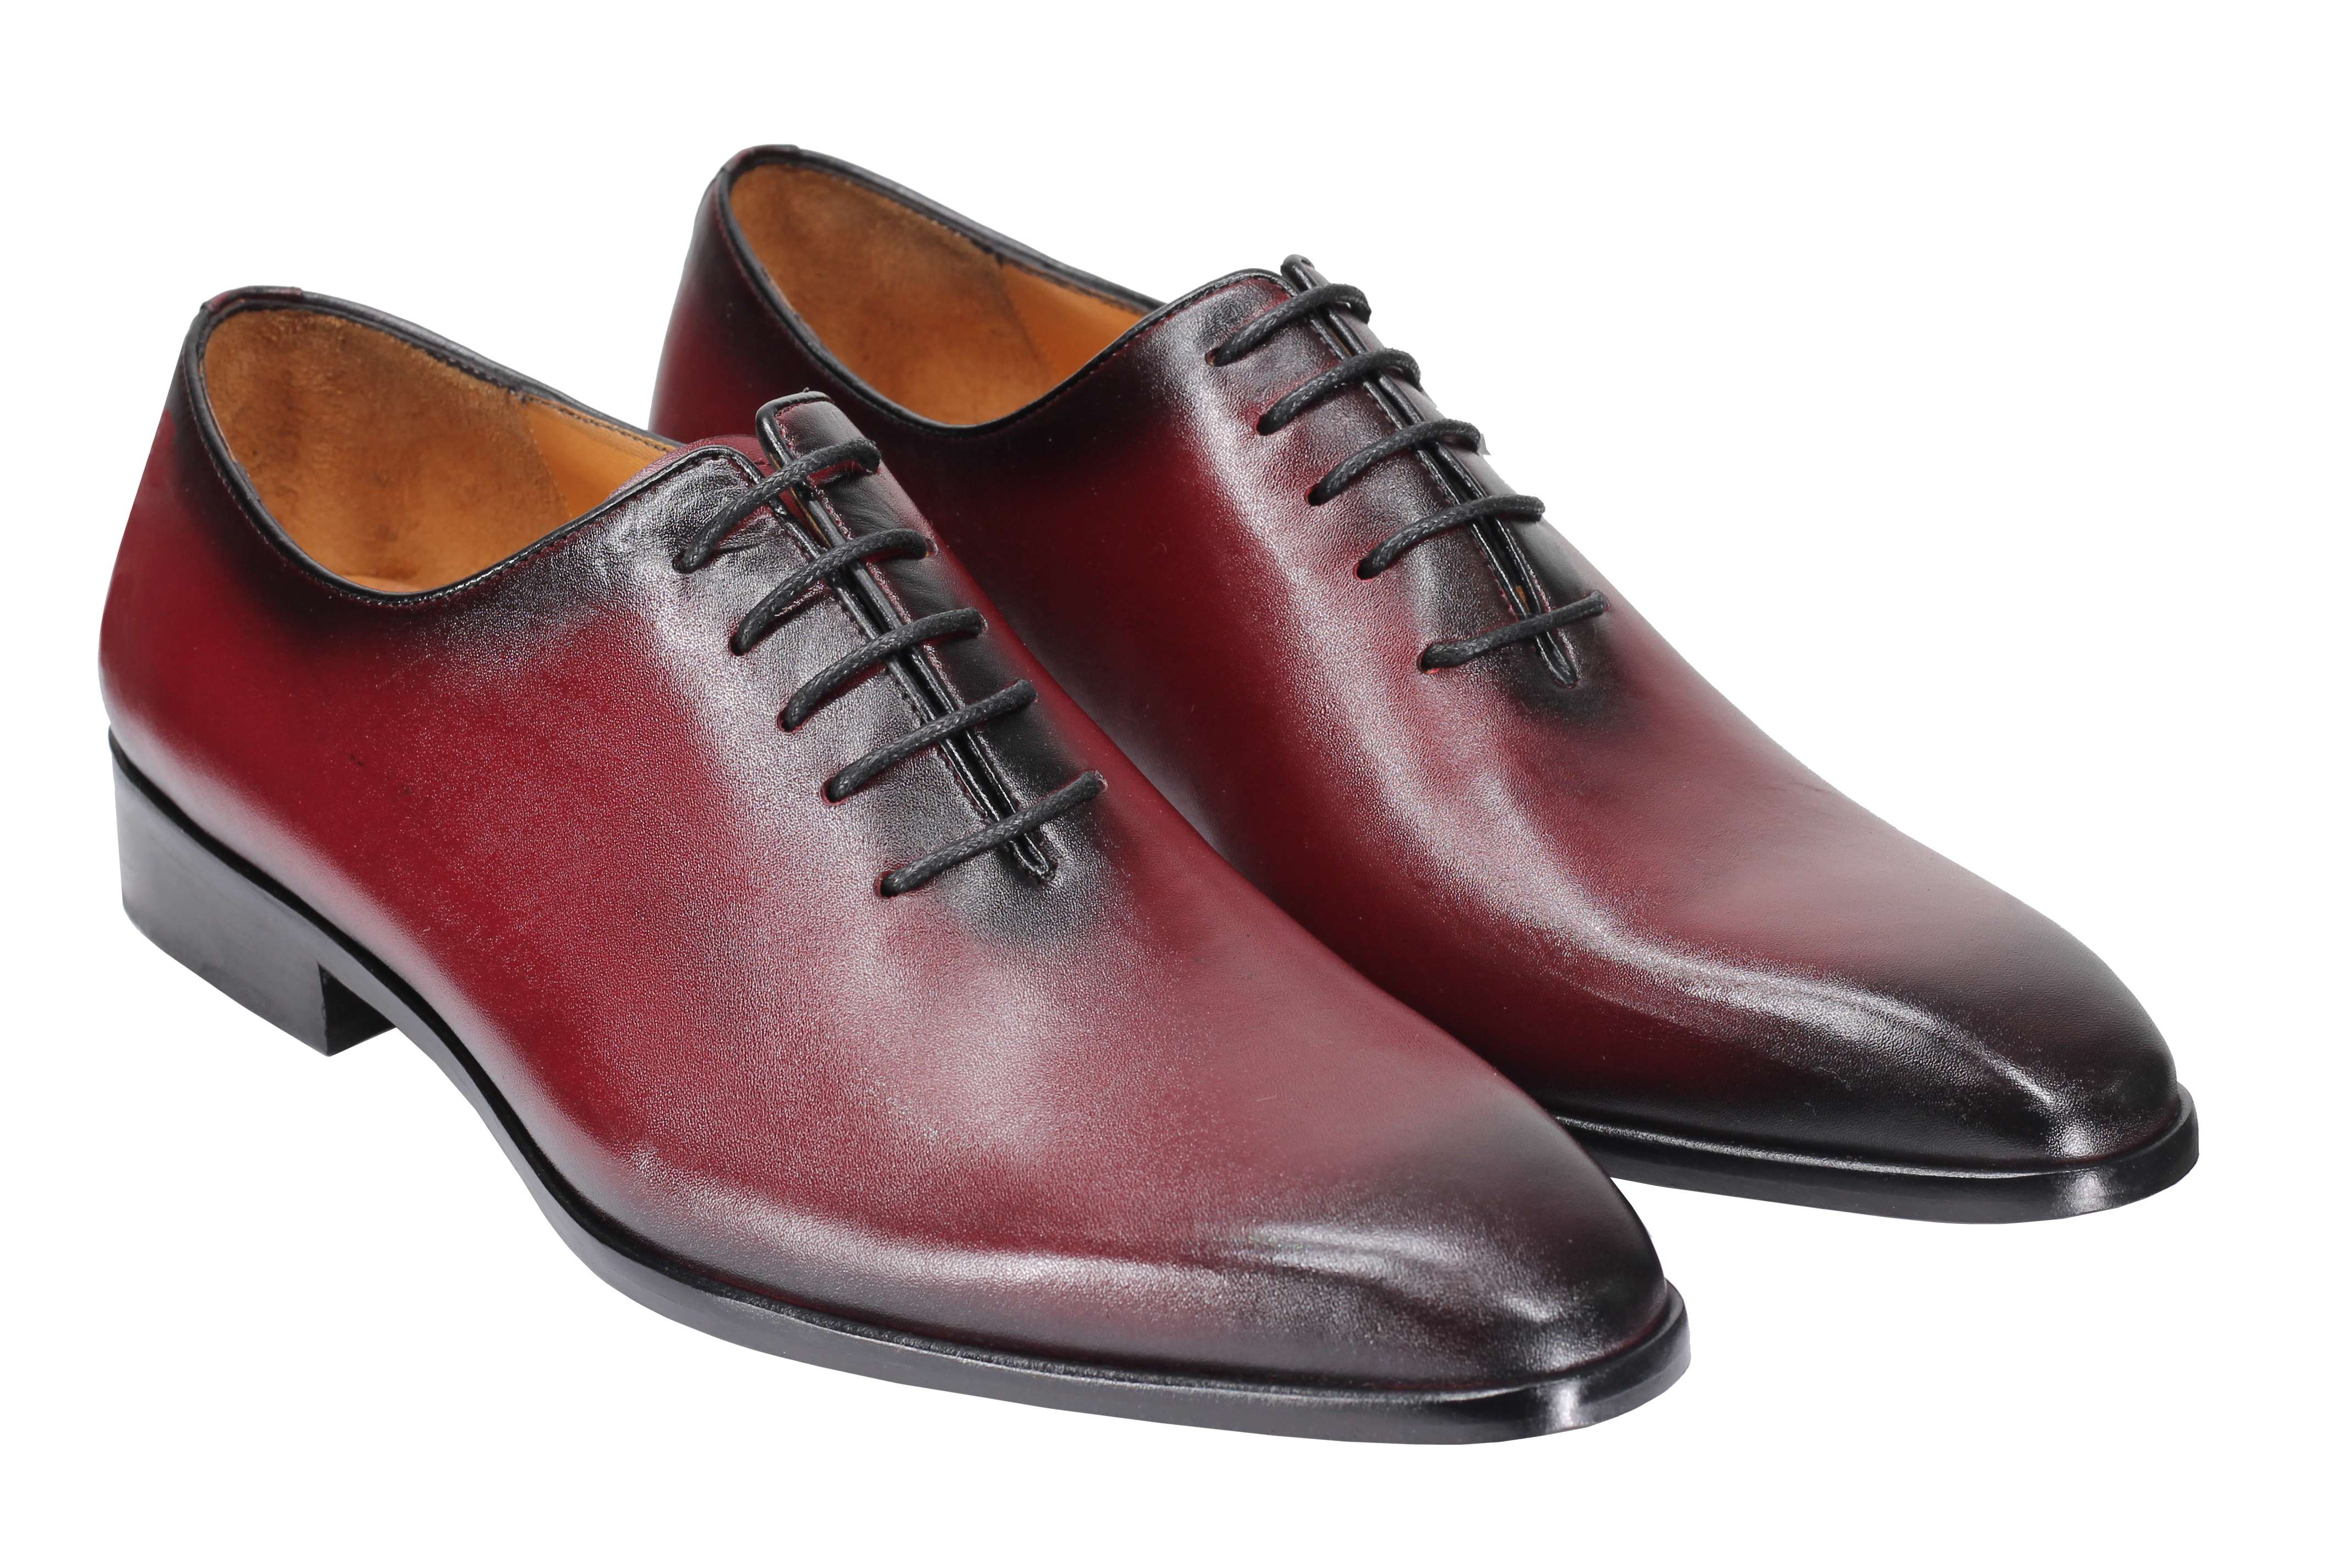 MAROON CALF LEATHER WHOLECUT OXFORD LACE UP SHOES